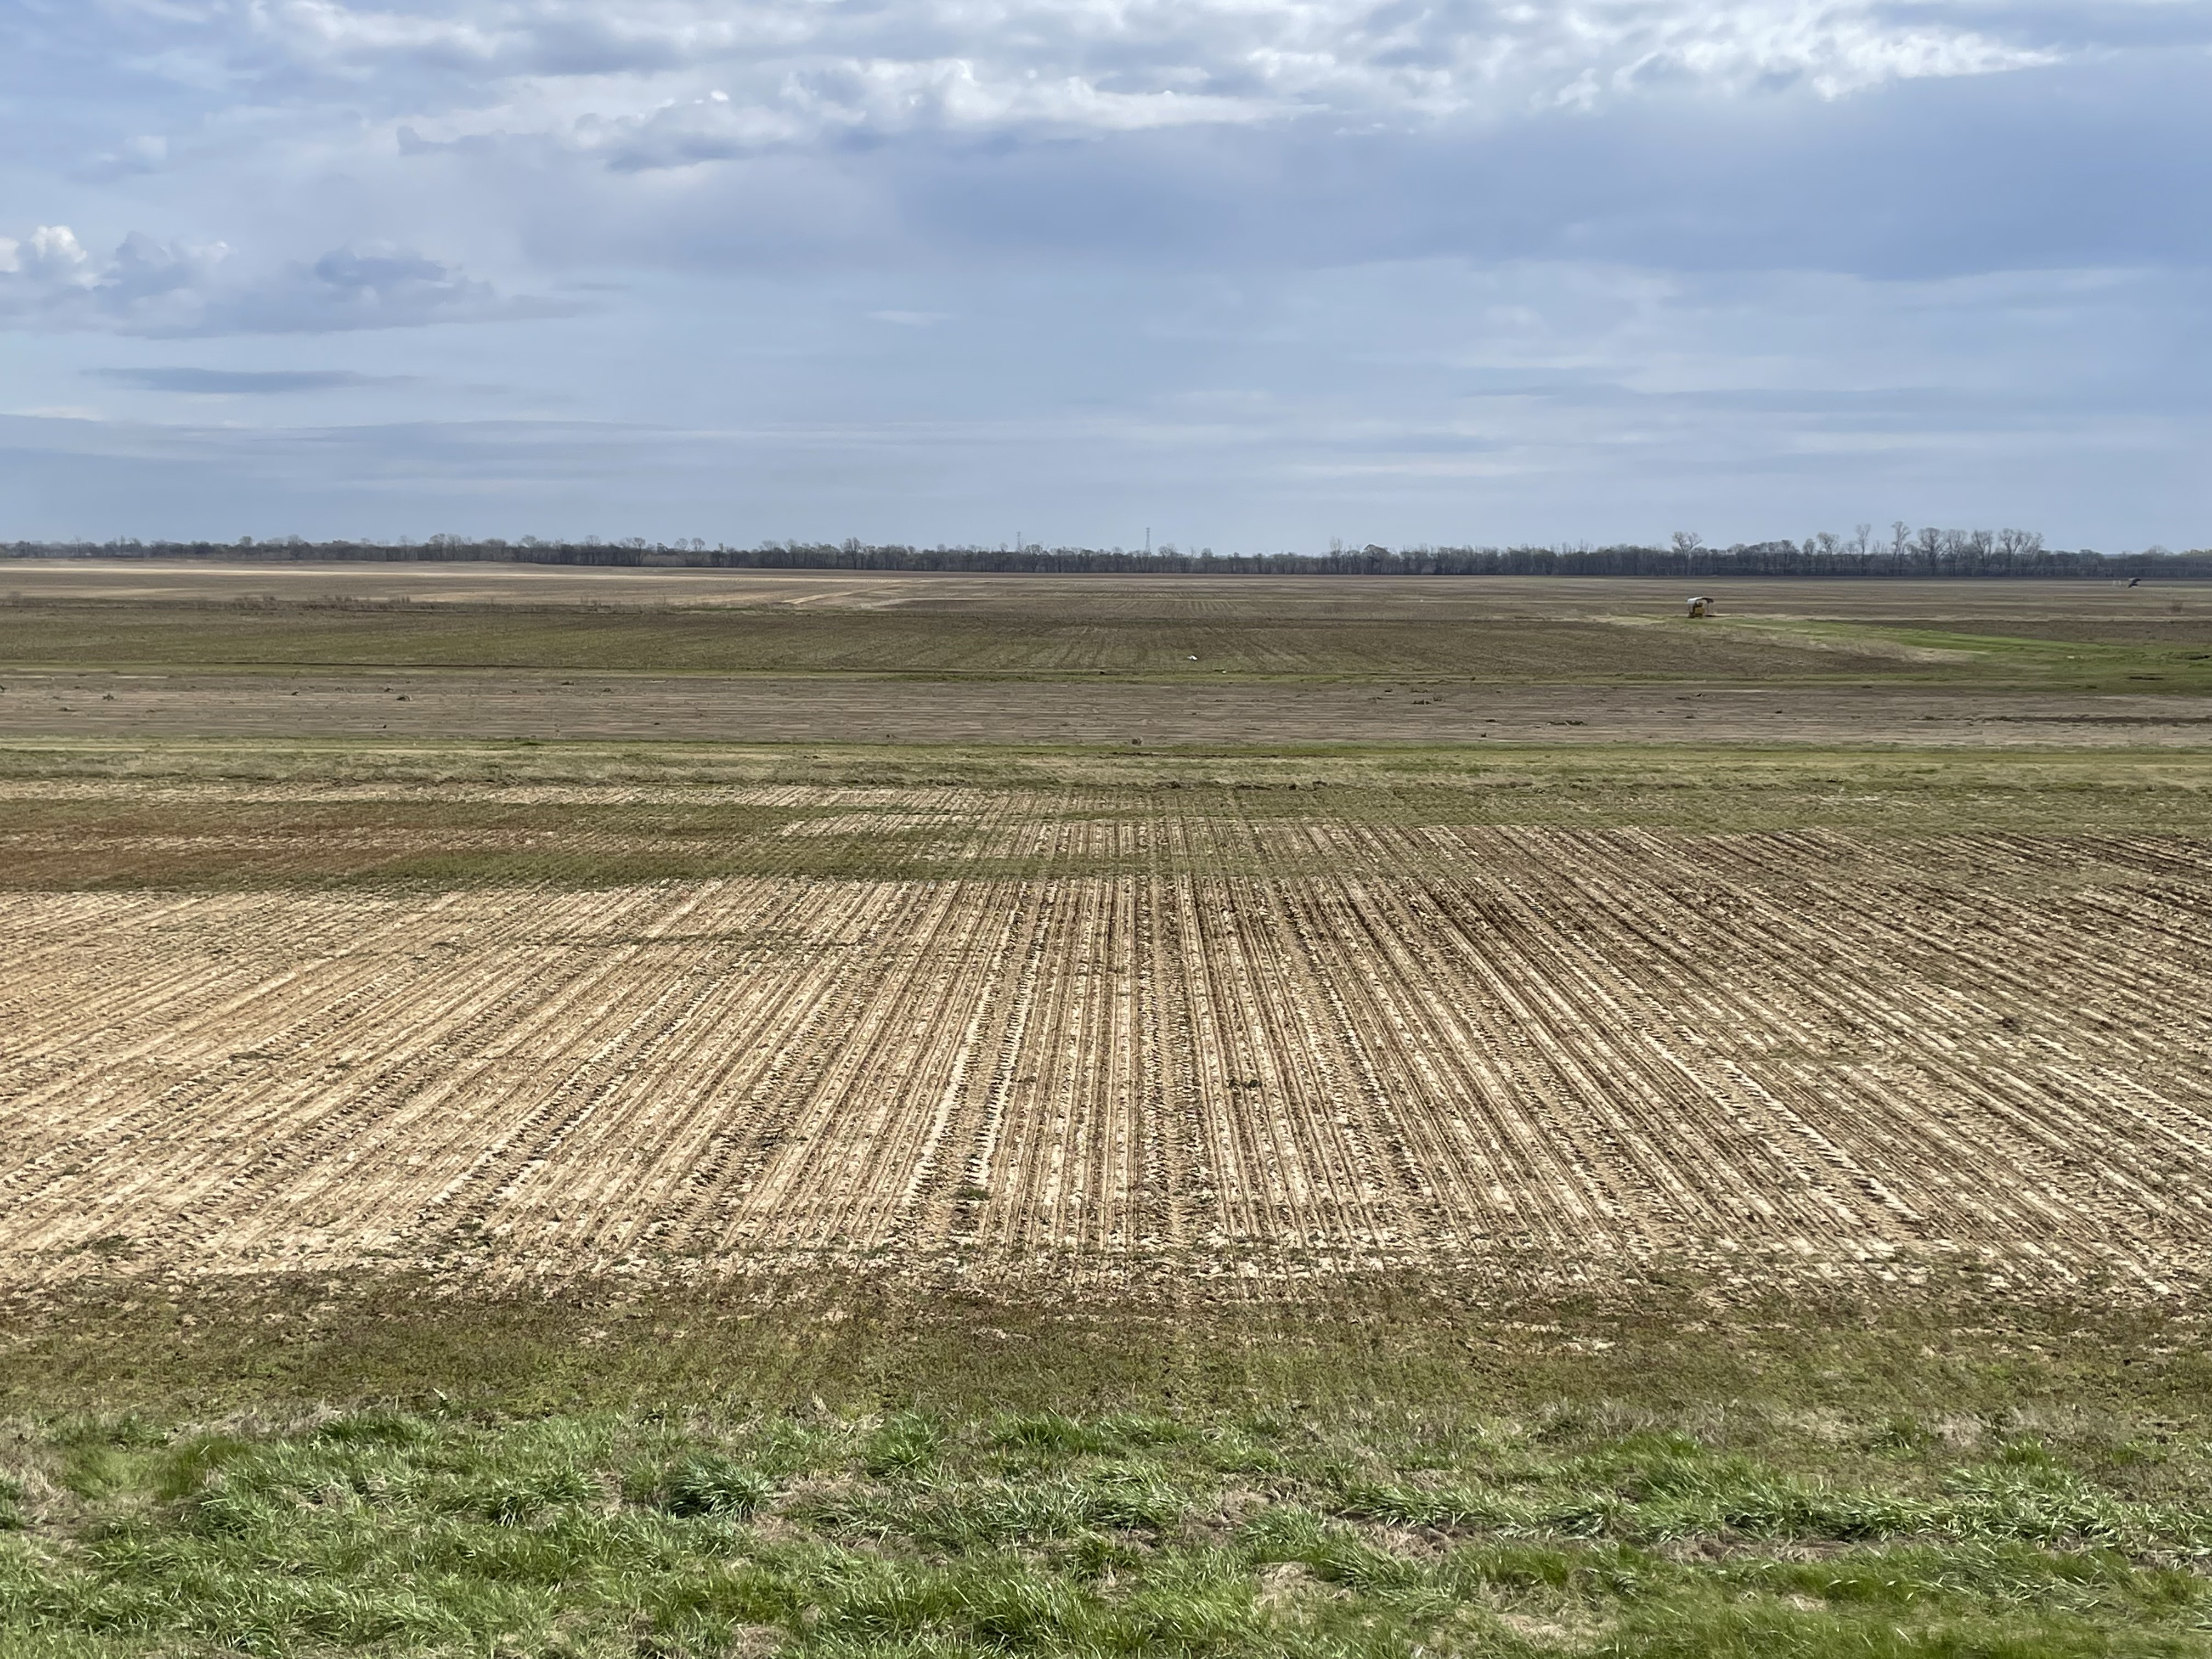 MU rice cultivar trial shows stark differences in first year